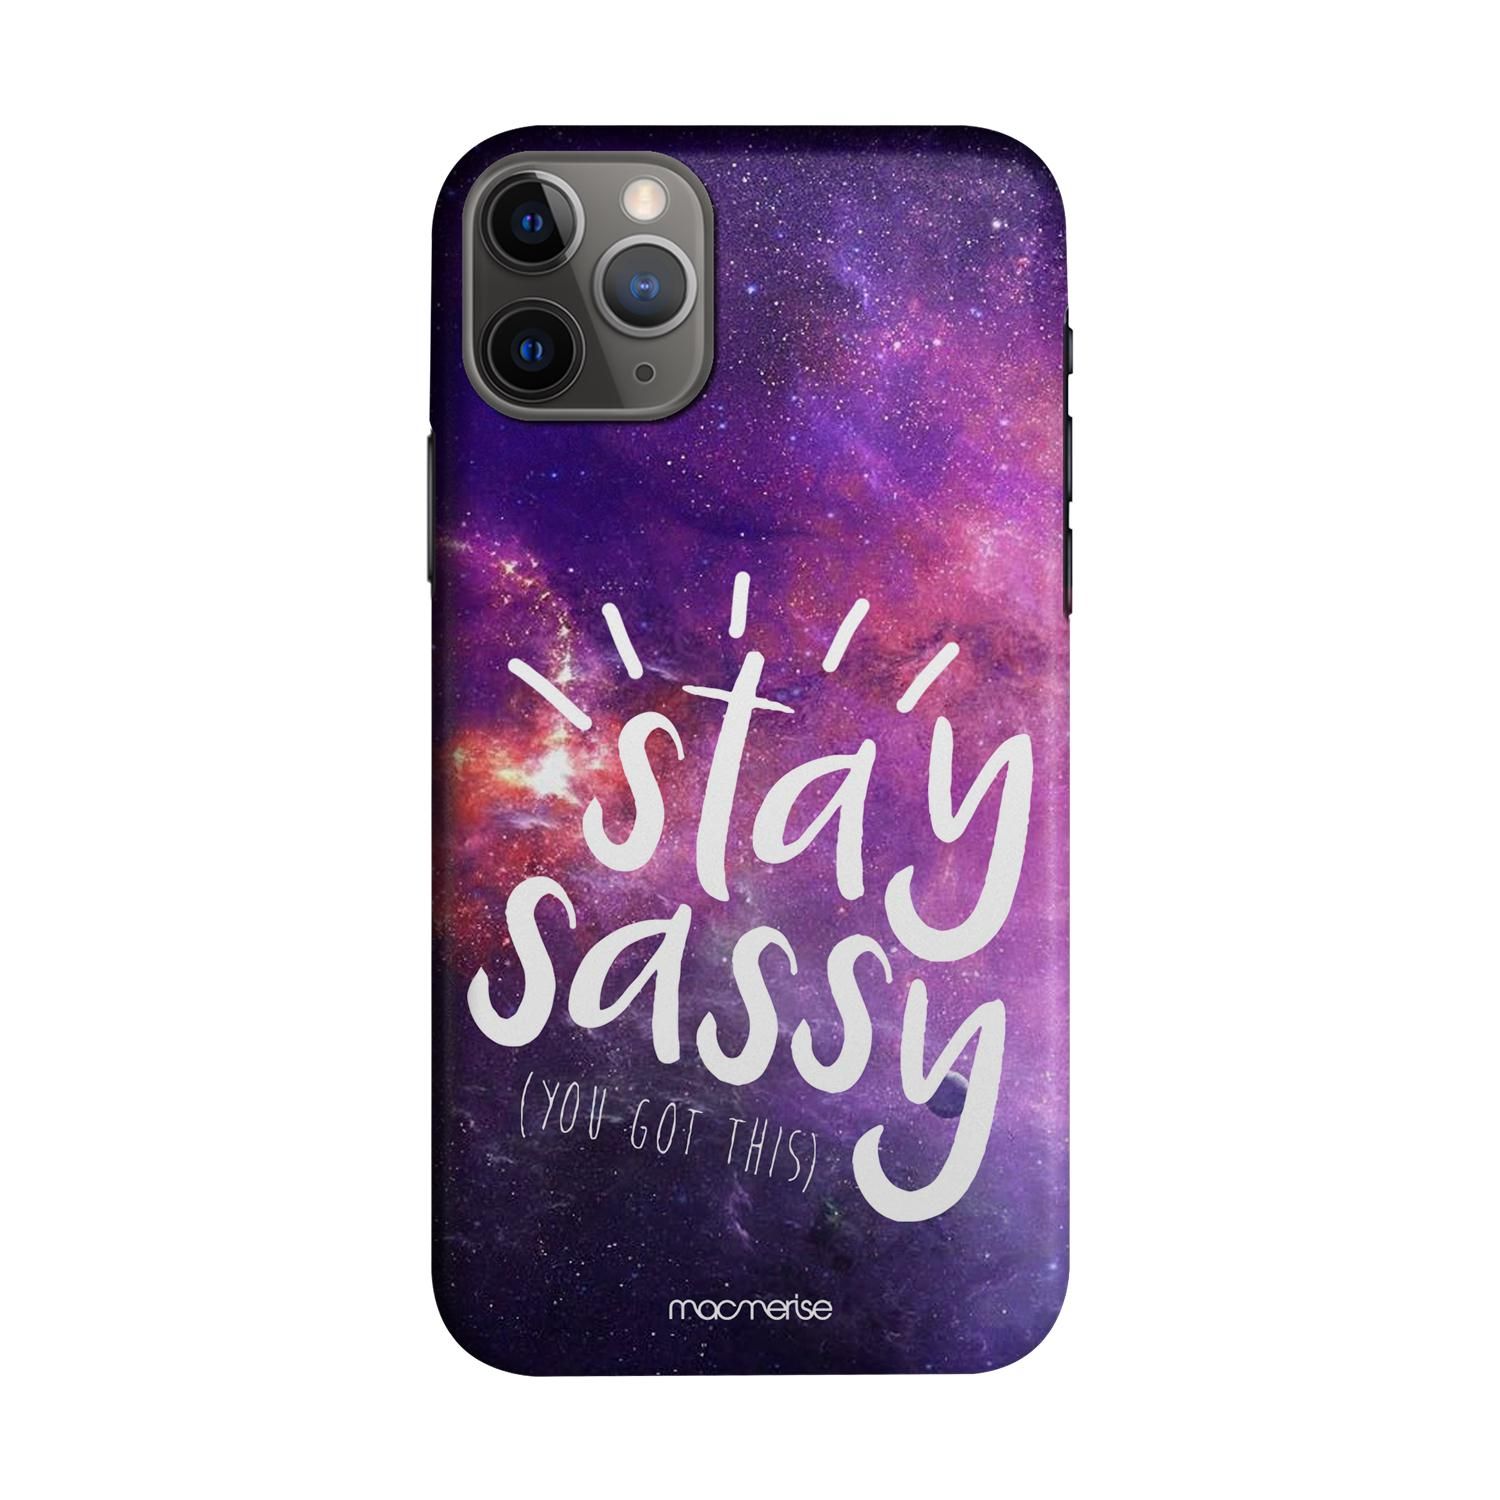 Buy Stay Sassy - Sleek Phone Case for iPhone 11 Pro Max Online